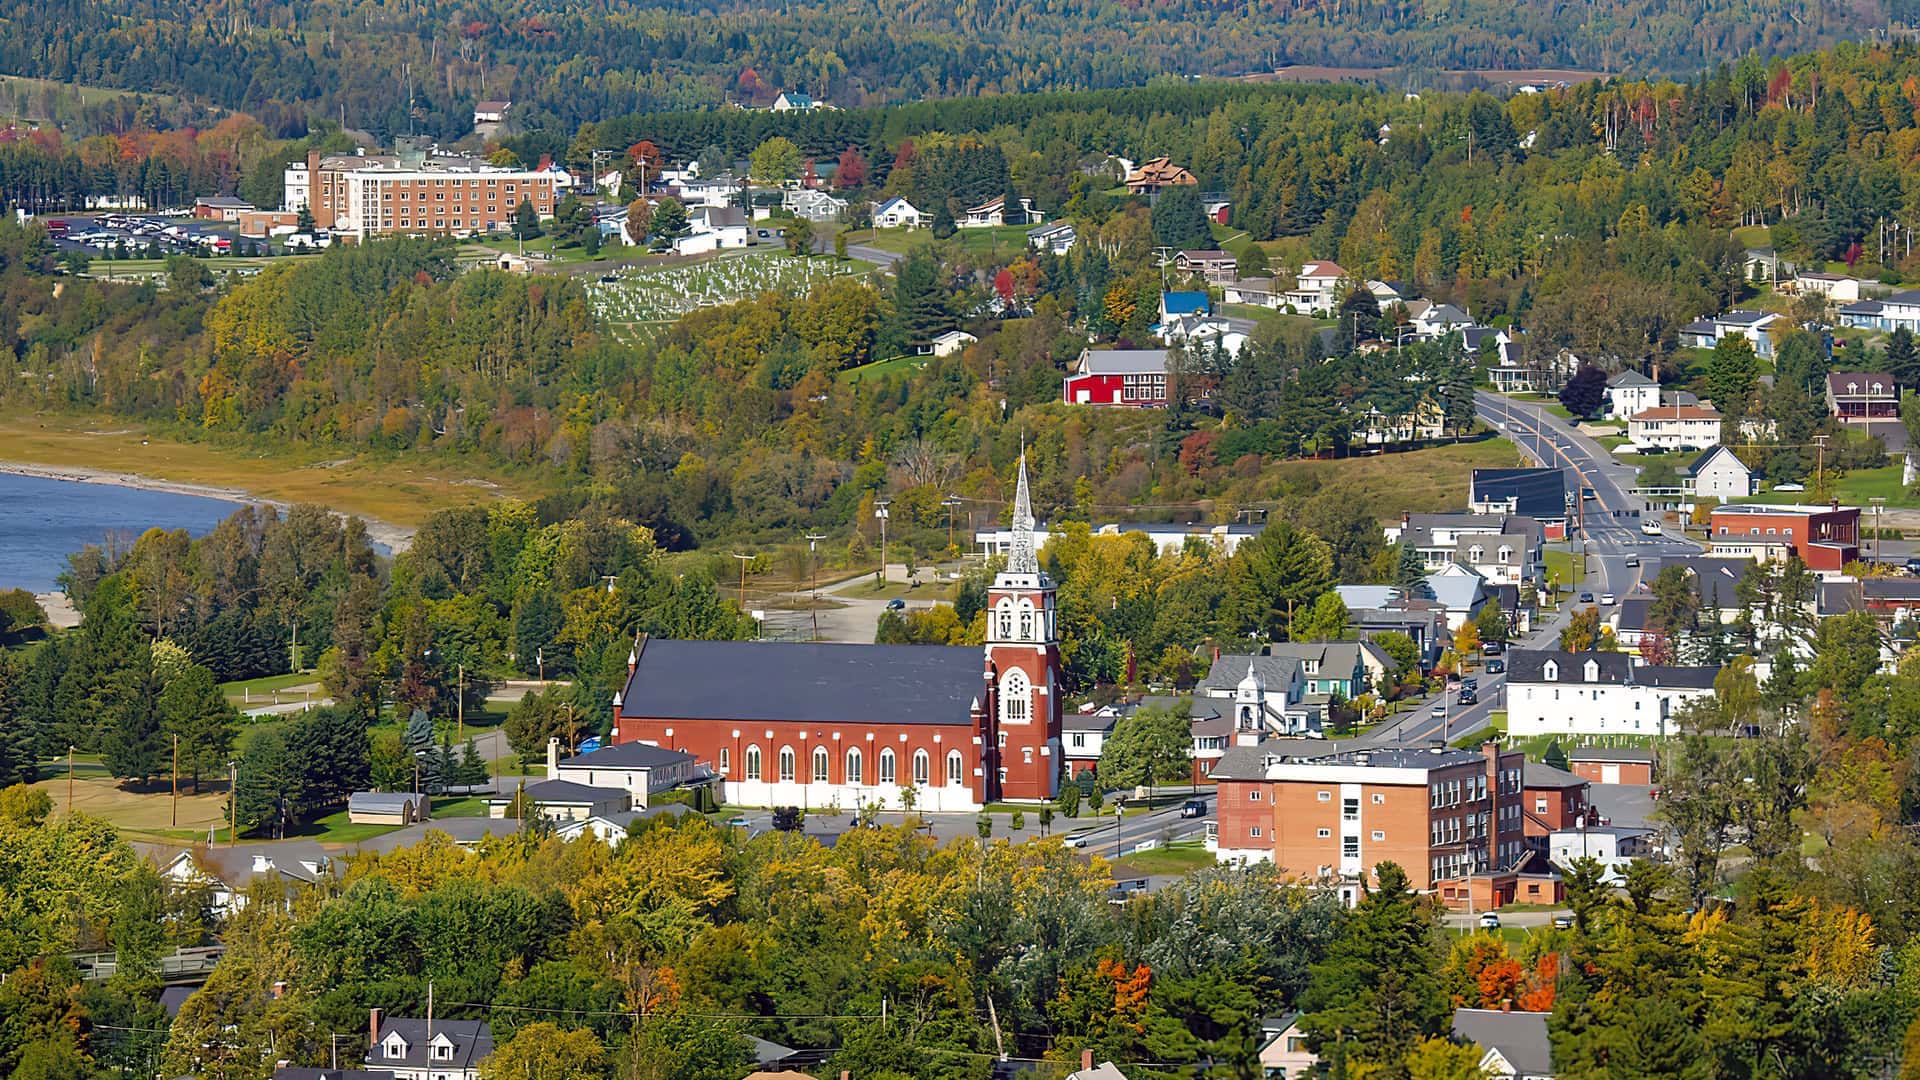 aerial photo of East Main Street in Fort Kent showing the local Catholic church and several business and residential buildings